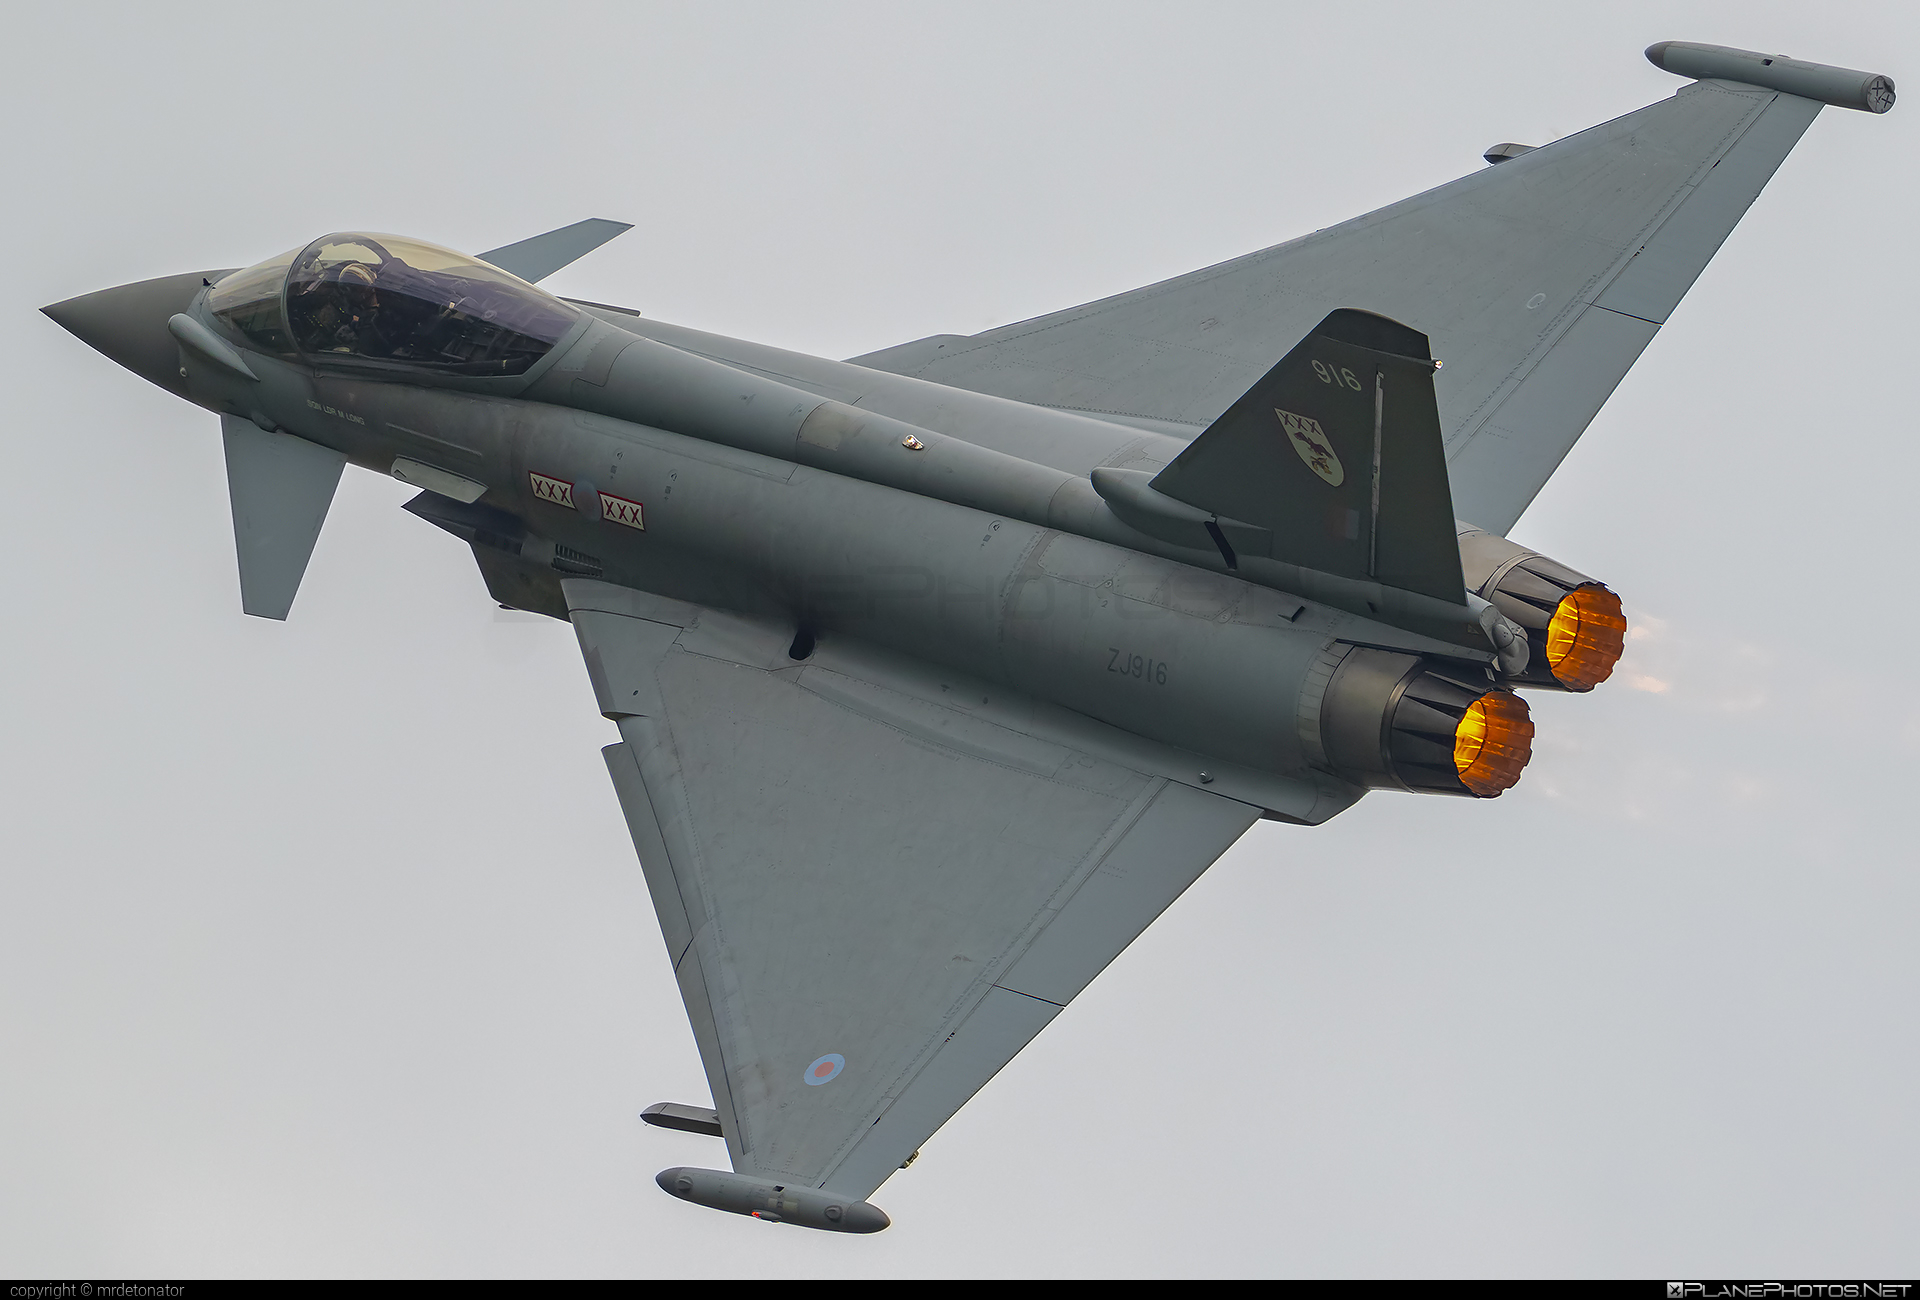 Eurofighter Typhoon FGR.4 - ZJ916 operated by Royal Air Force (RAF) #ef2000 #eurofighter #eurofightertyphoon #kecskemetairshow2021 #raf #royalAirForce #typhoon #typhoonfgr4